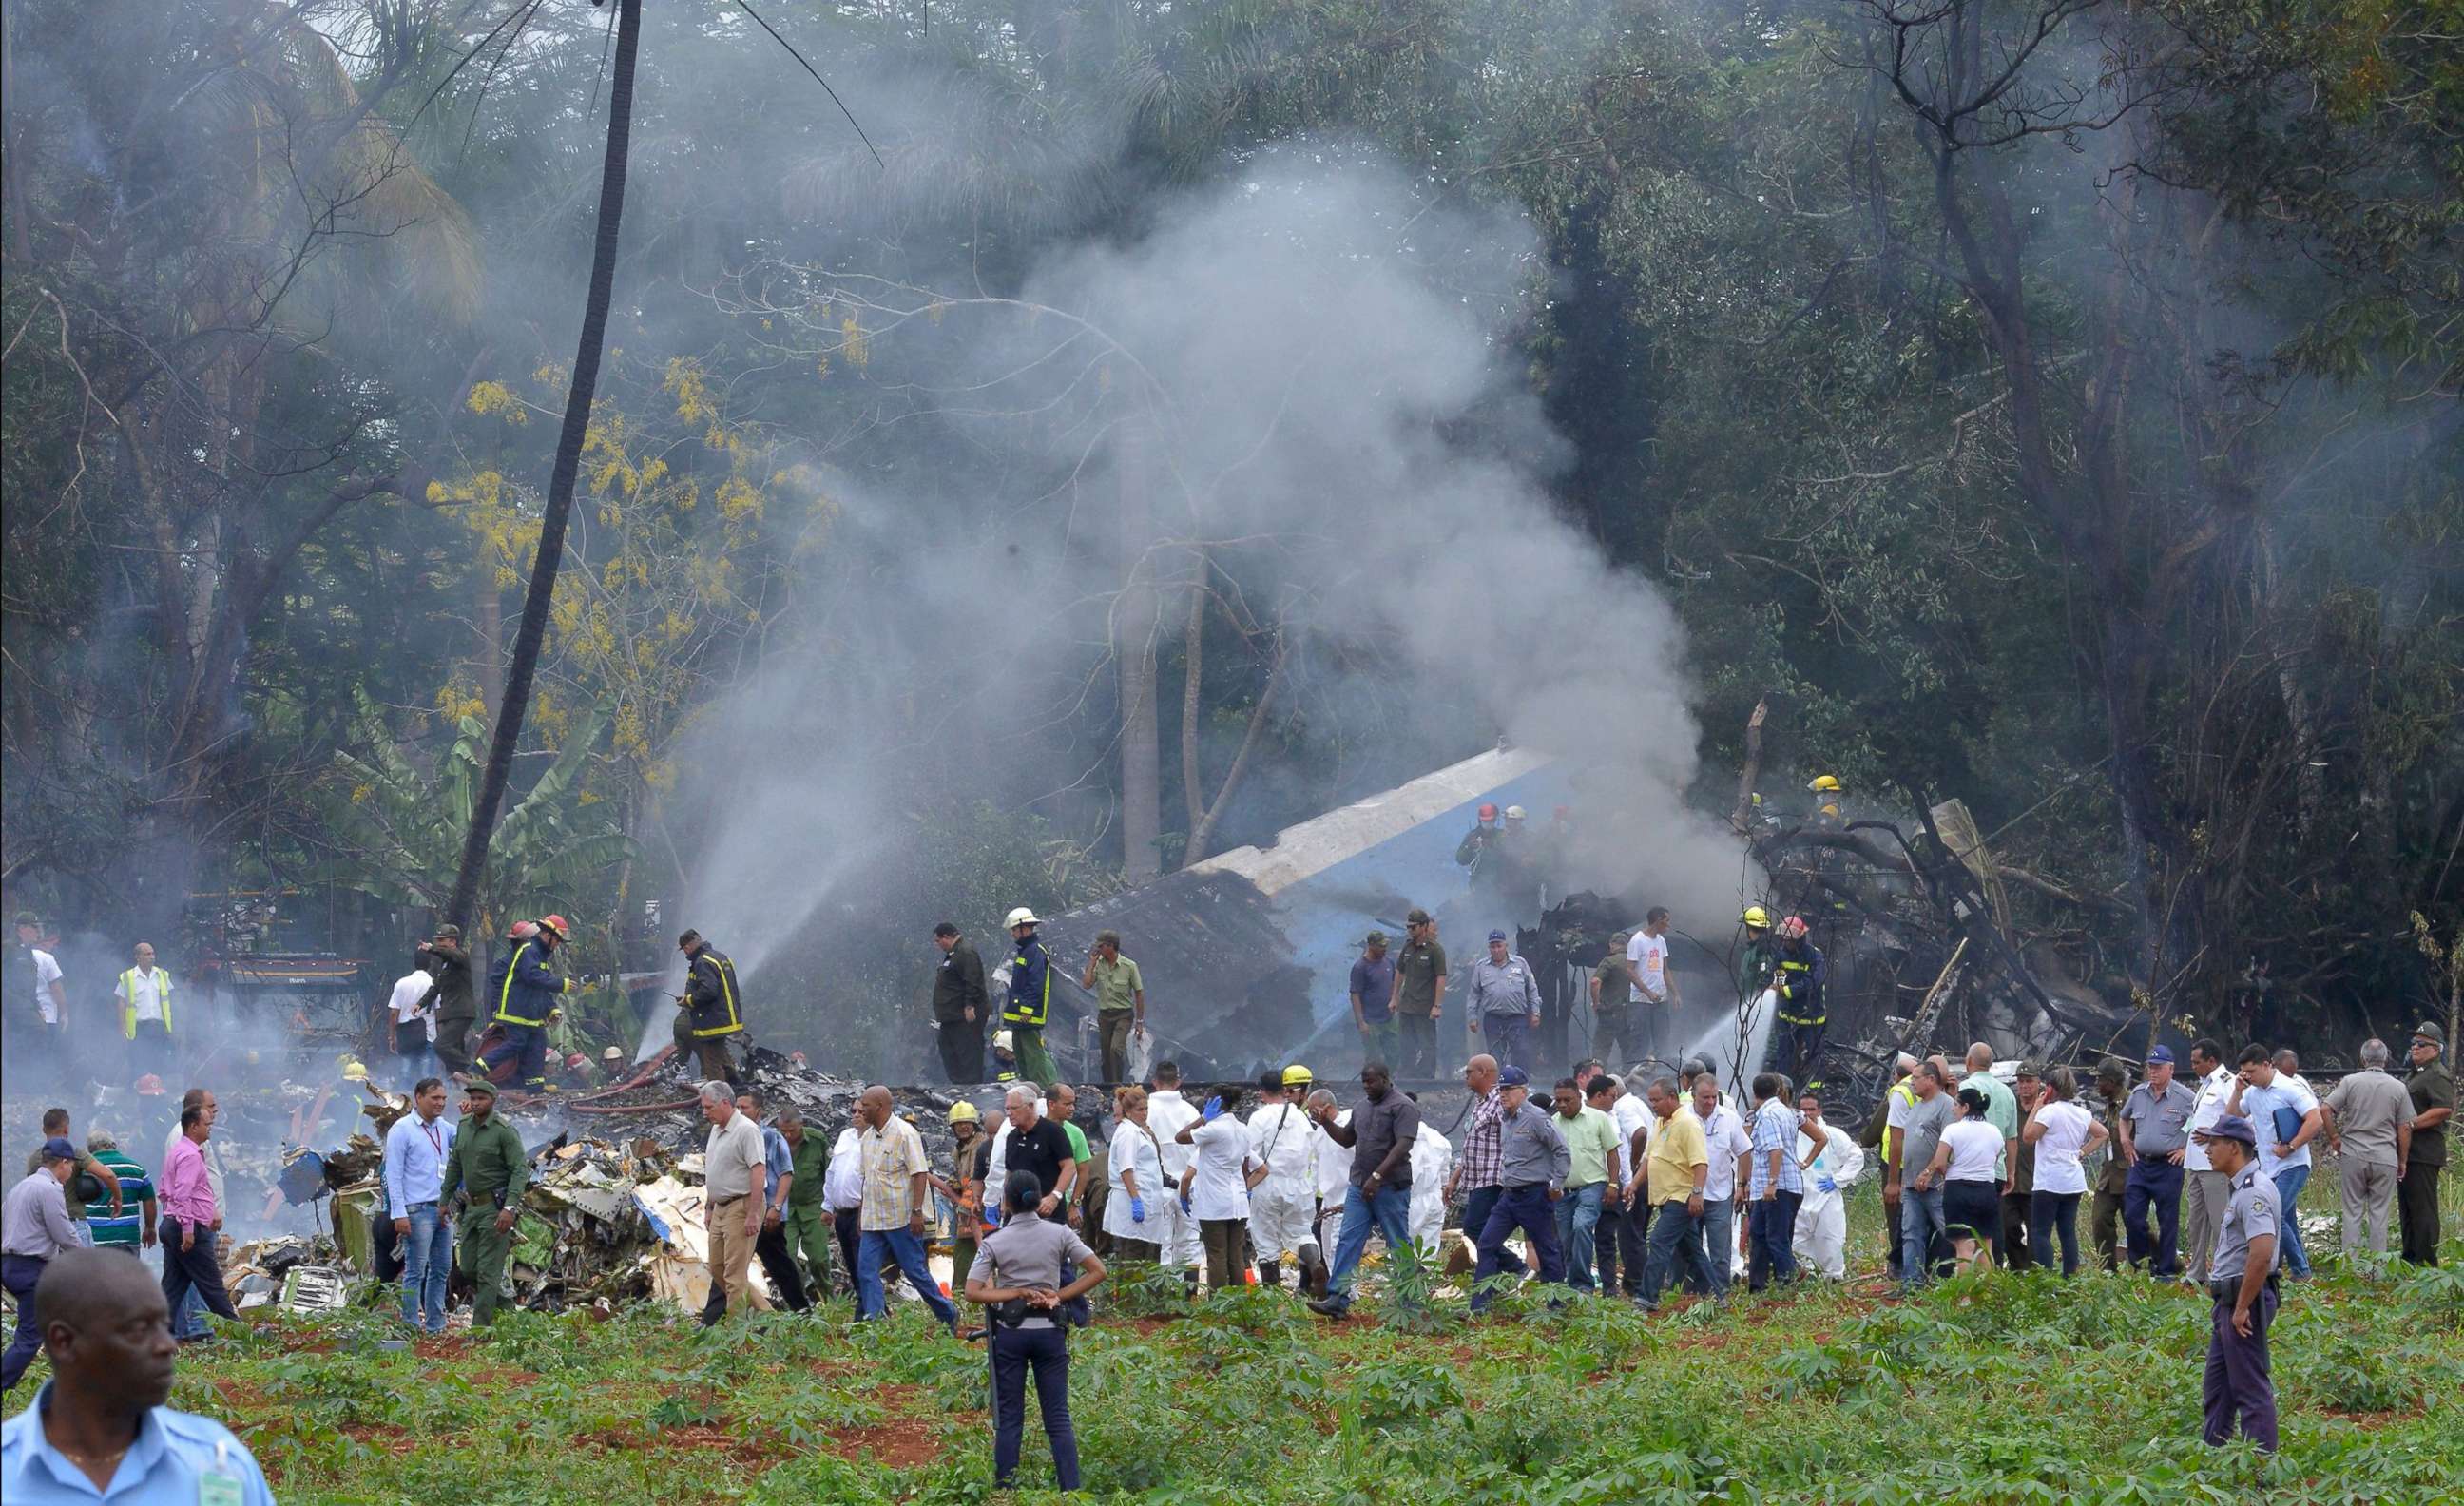 PHOTO: The scene where a Cubana de Aviacion aircraft crashed after taking off from Havana's Jose Marti airport, May 18, 2018 in Cuba.